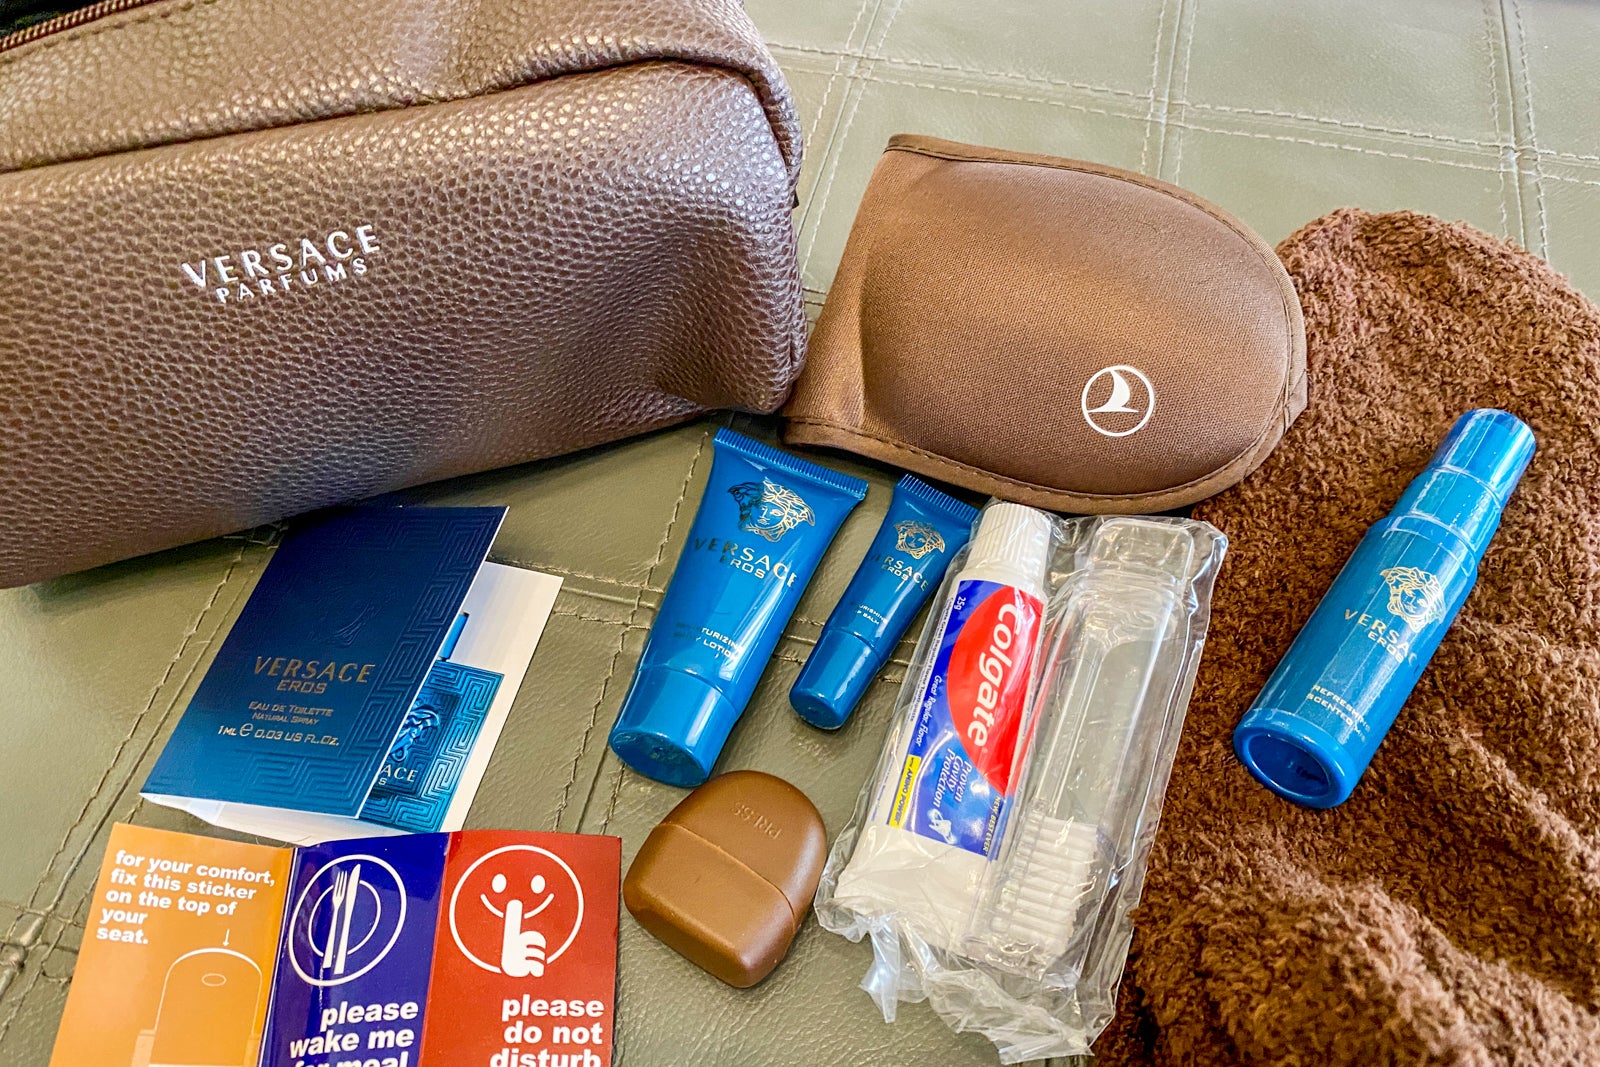 turkish airlines business class travel kit